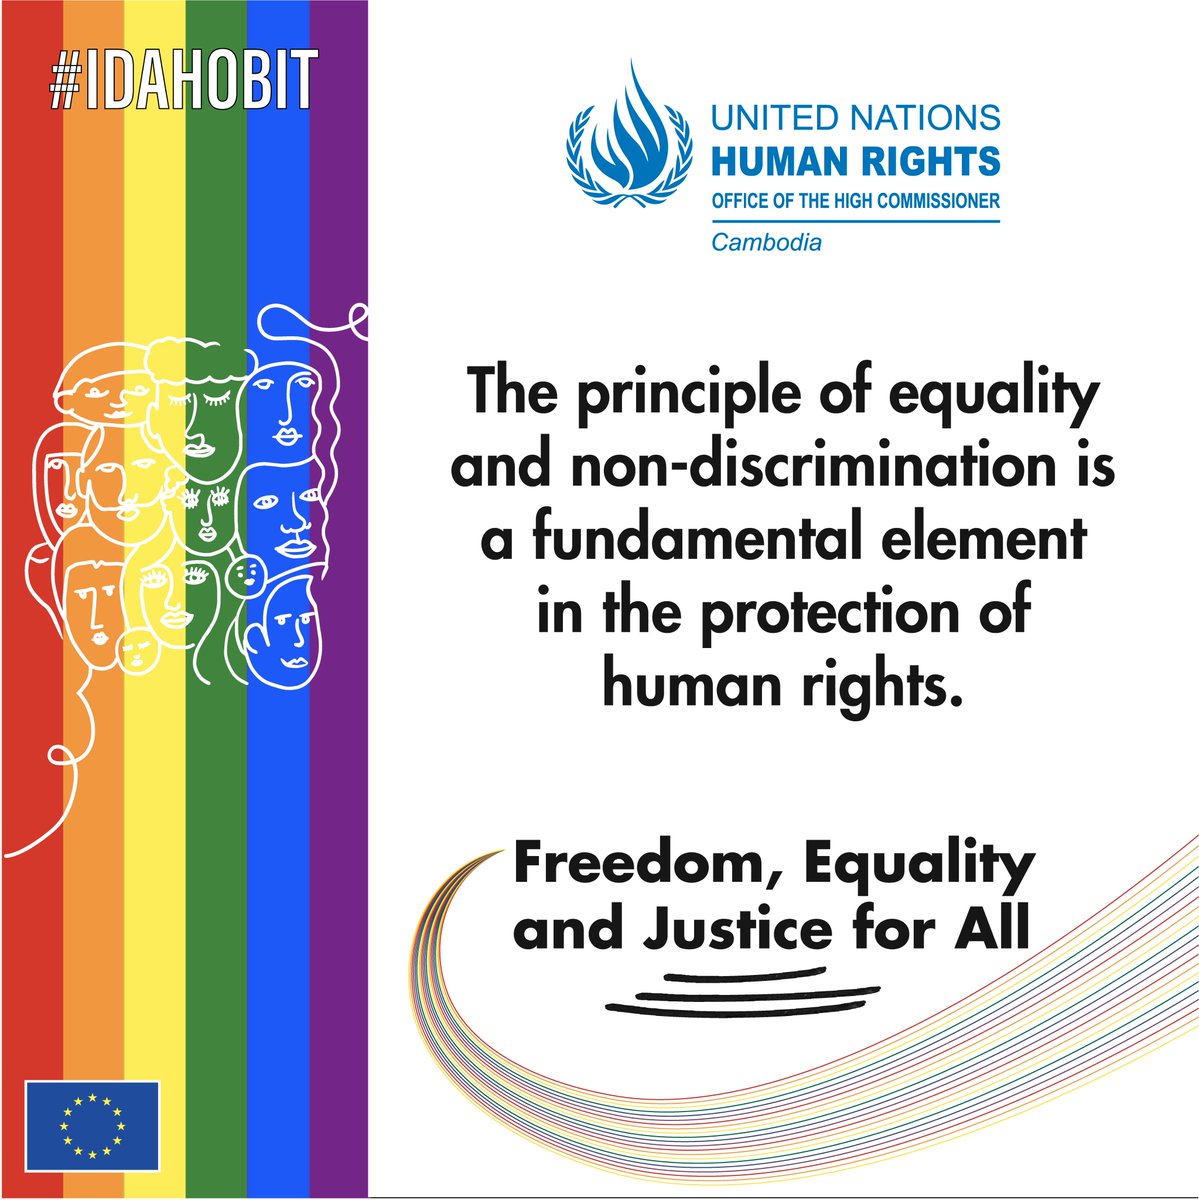 🇺🇳🇪🇺📢Freedom, Equality and Justice for #LGBT People 🏳️‍🌈🇰🇭! The principle of equality and non-discrimination is a fundamental element in the protection of human rights. Freedom, Equality and Justice for All. @free_equal #IDAHOBIT #HumanRights4All #Act4RightsNow #AlliesinAction